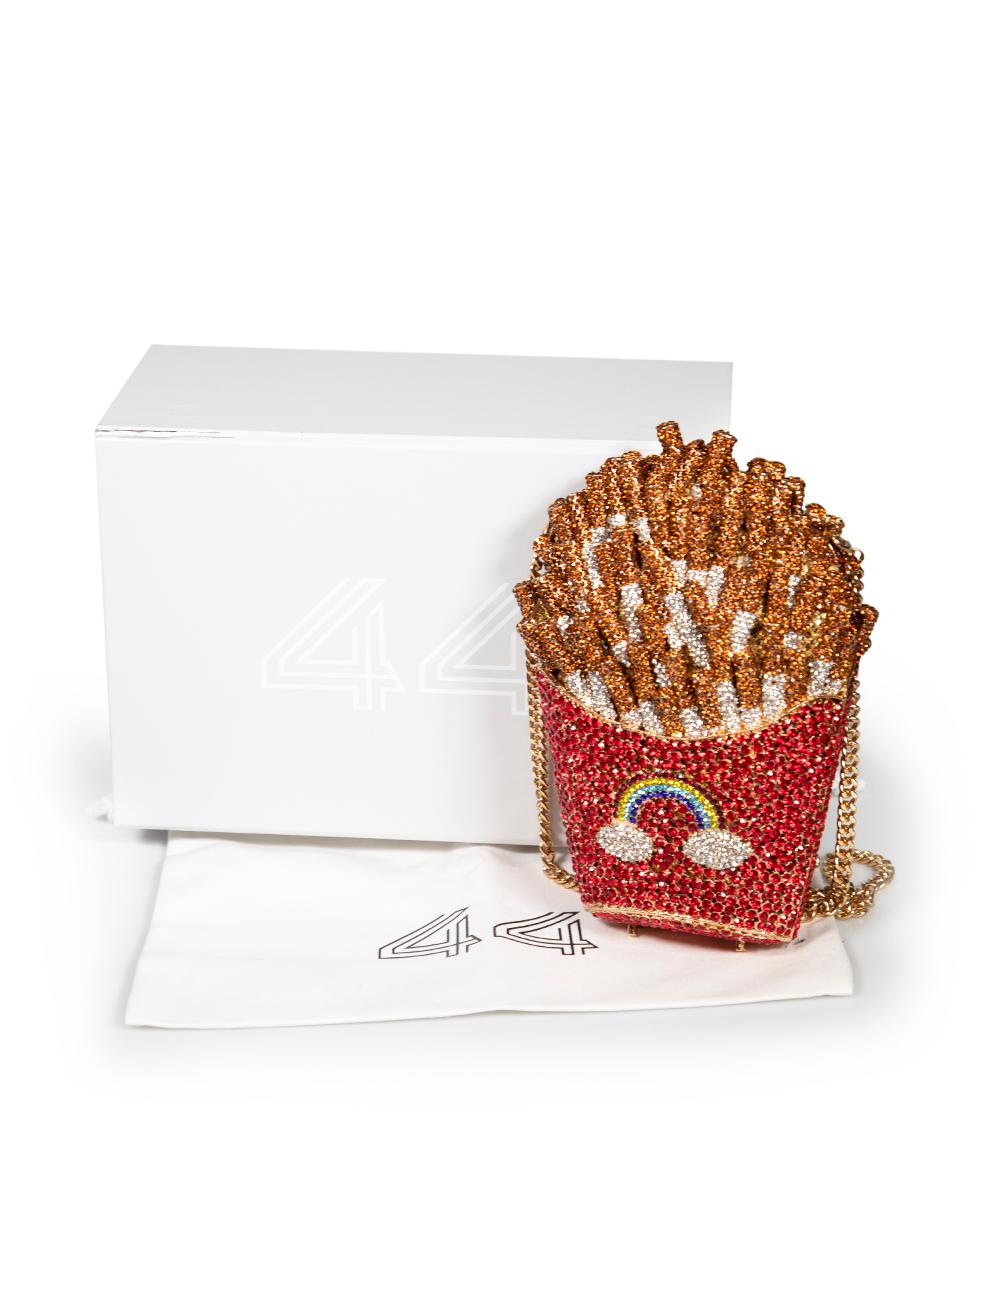 44 Once Upon A Time Embellished Cigarette Fries Clutch For Sale 2